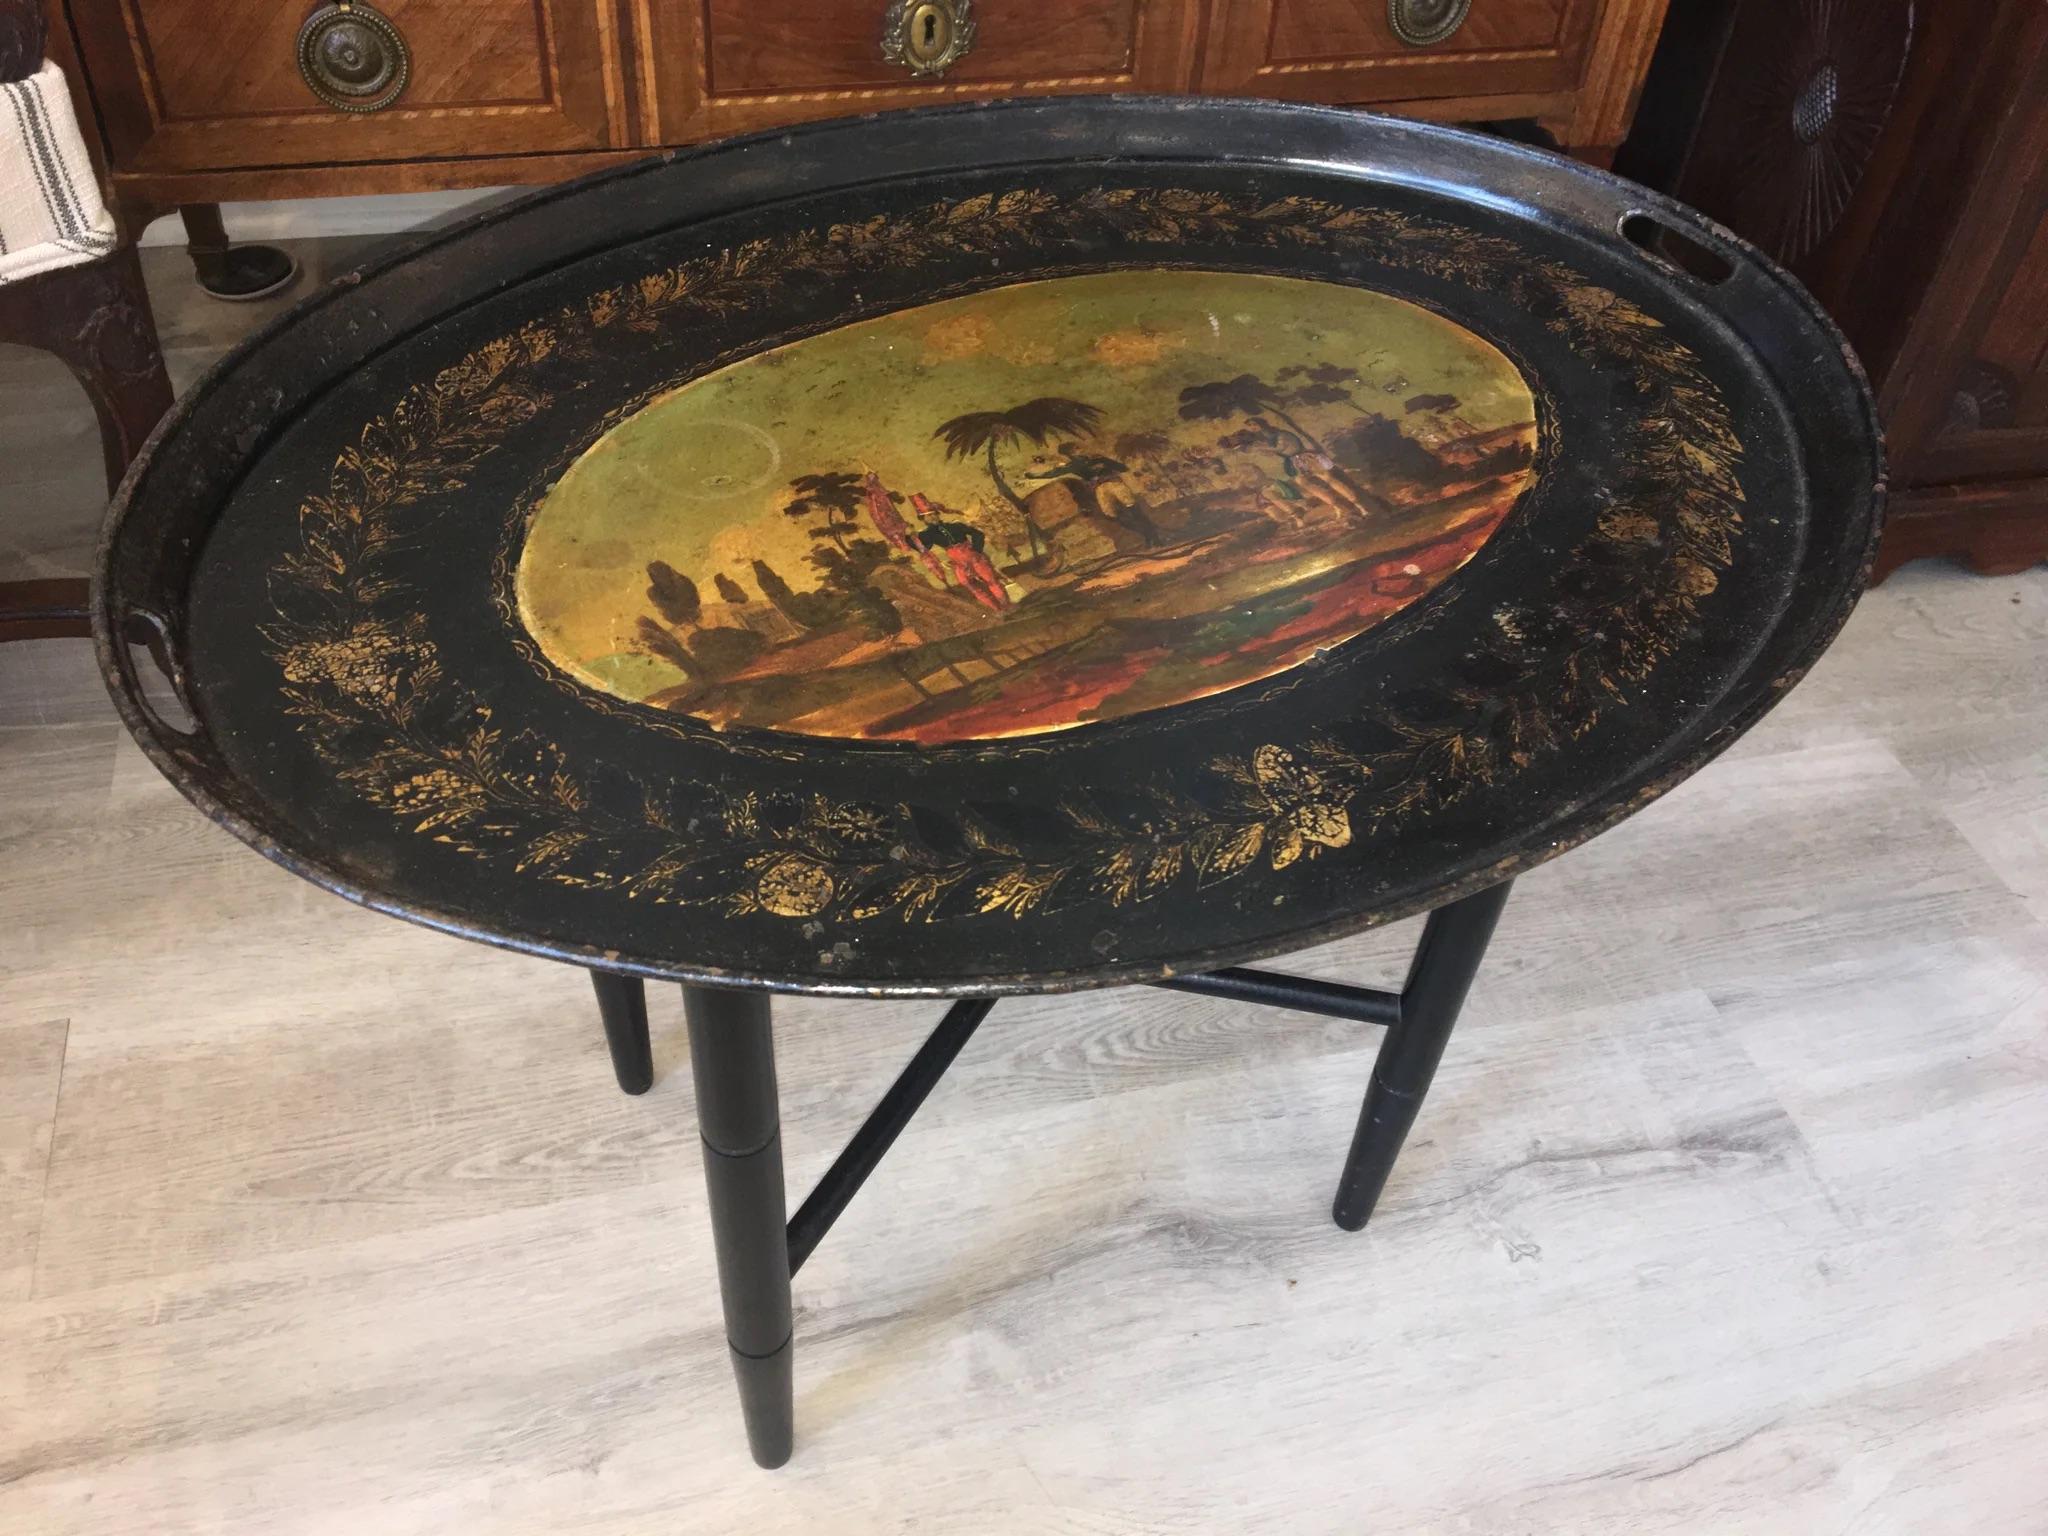 19th century French tole tray with beautifully executed, detailed and original painting, likely relating to French Polynesian Islands. Tray is earlier than the stand, but the stand appears to be later 19th century. The tray alone looks lovely